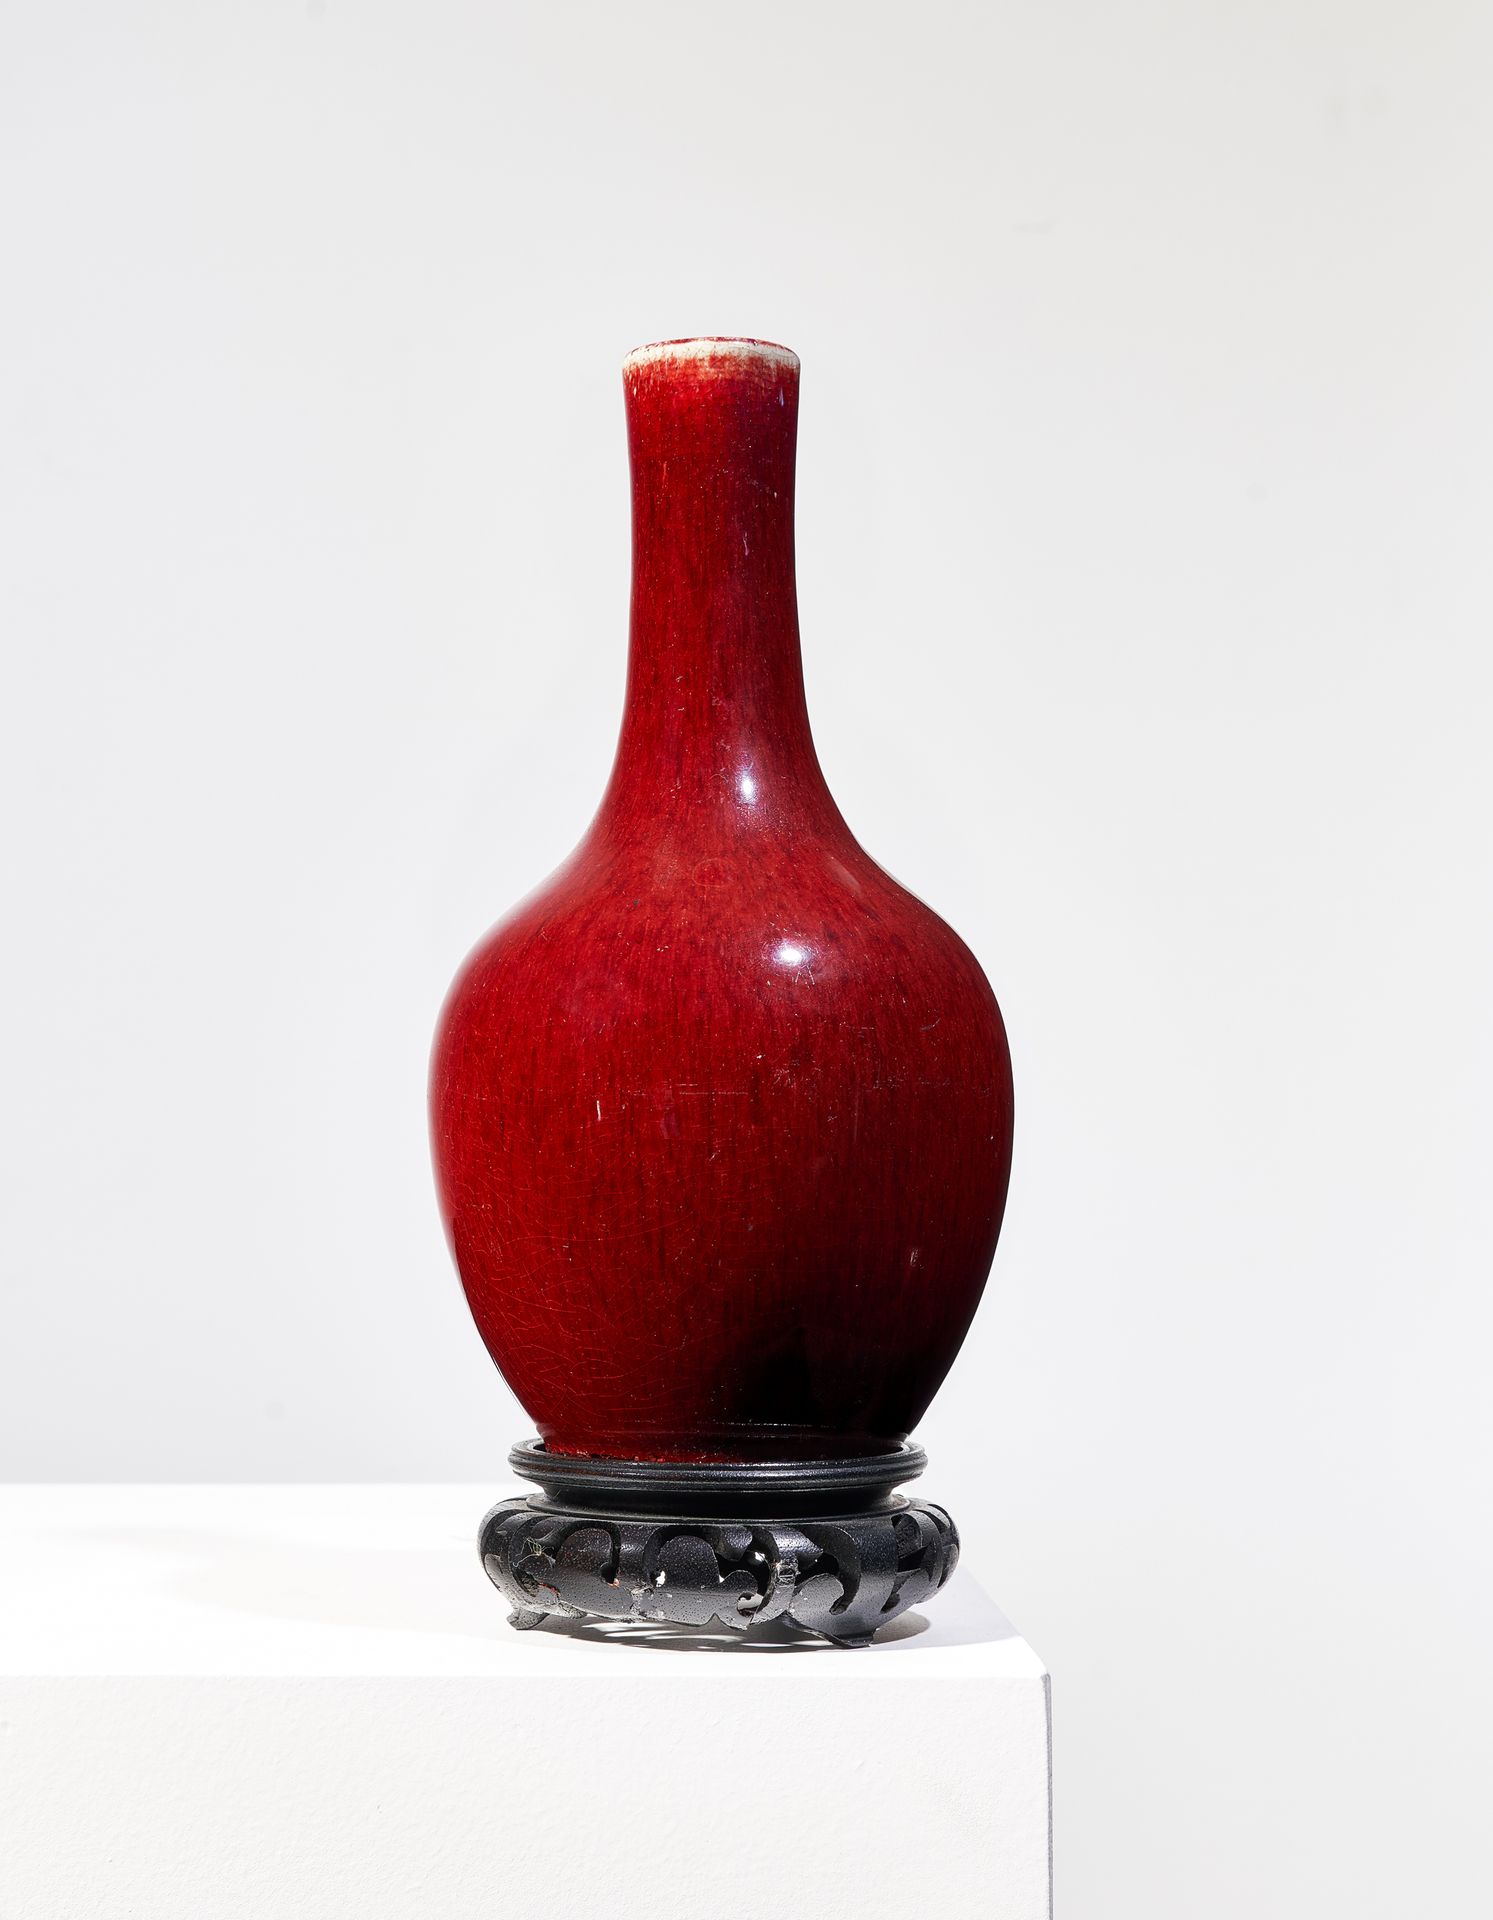 Null A LANGYO BOTTLE VASE

Late Qing dynasty (1644-1911) 

Of deep red color wit&hellip;